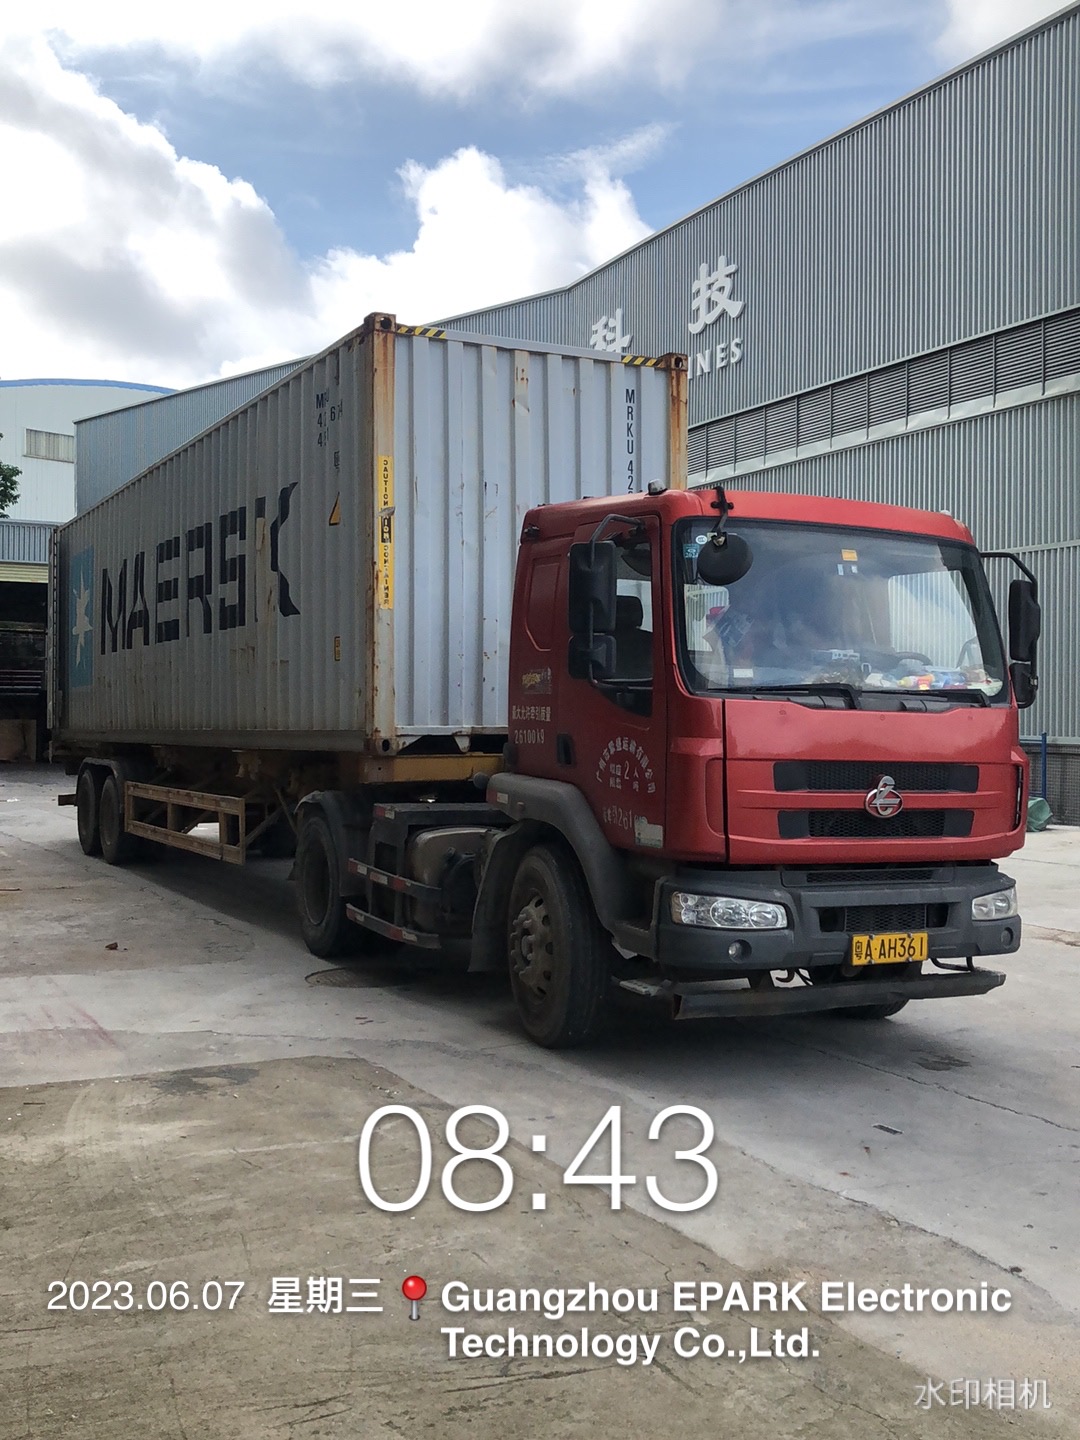 EPARK Two Containers Shipped To Bolivia